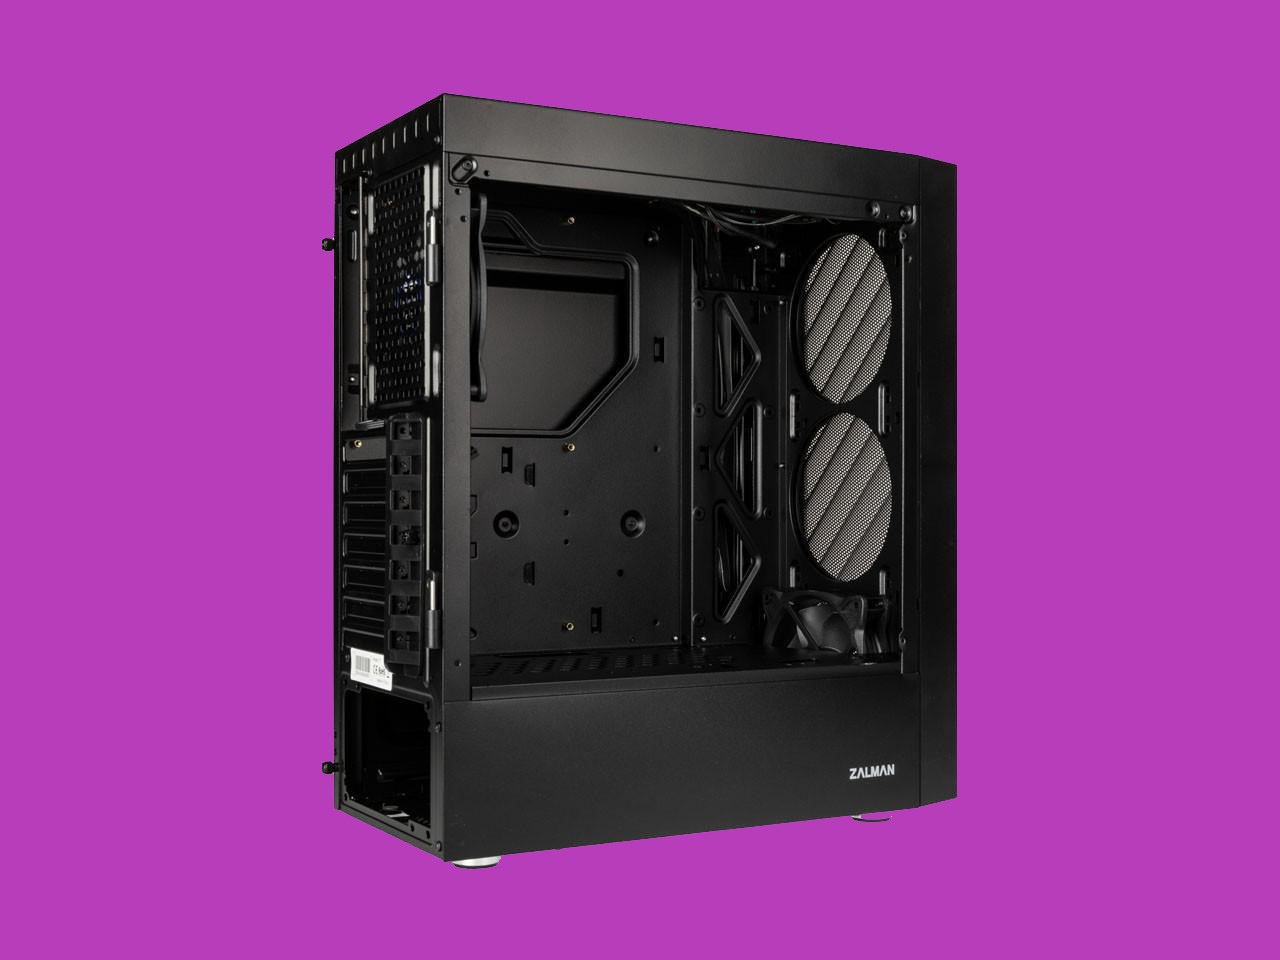 Read more about the article The Best Budget Gaming PC for Fortnite, VALORANT, CS:GO, Minecraft: Get 60FPS at 1080p For Under $400 in 2023